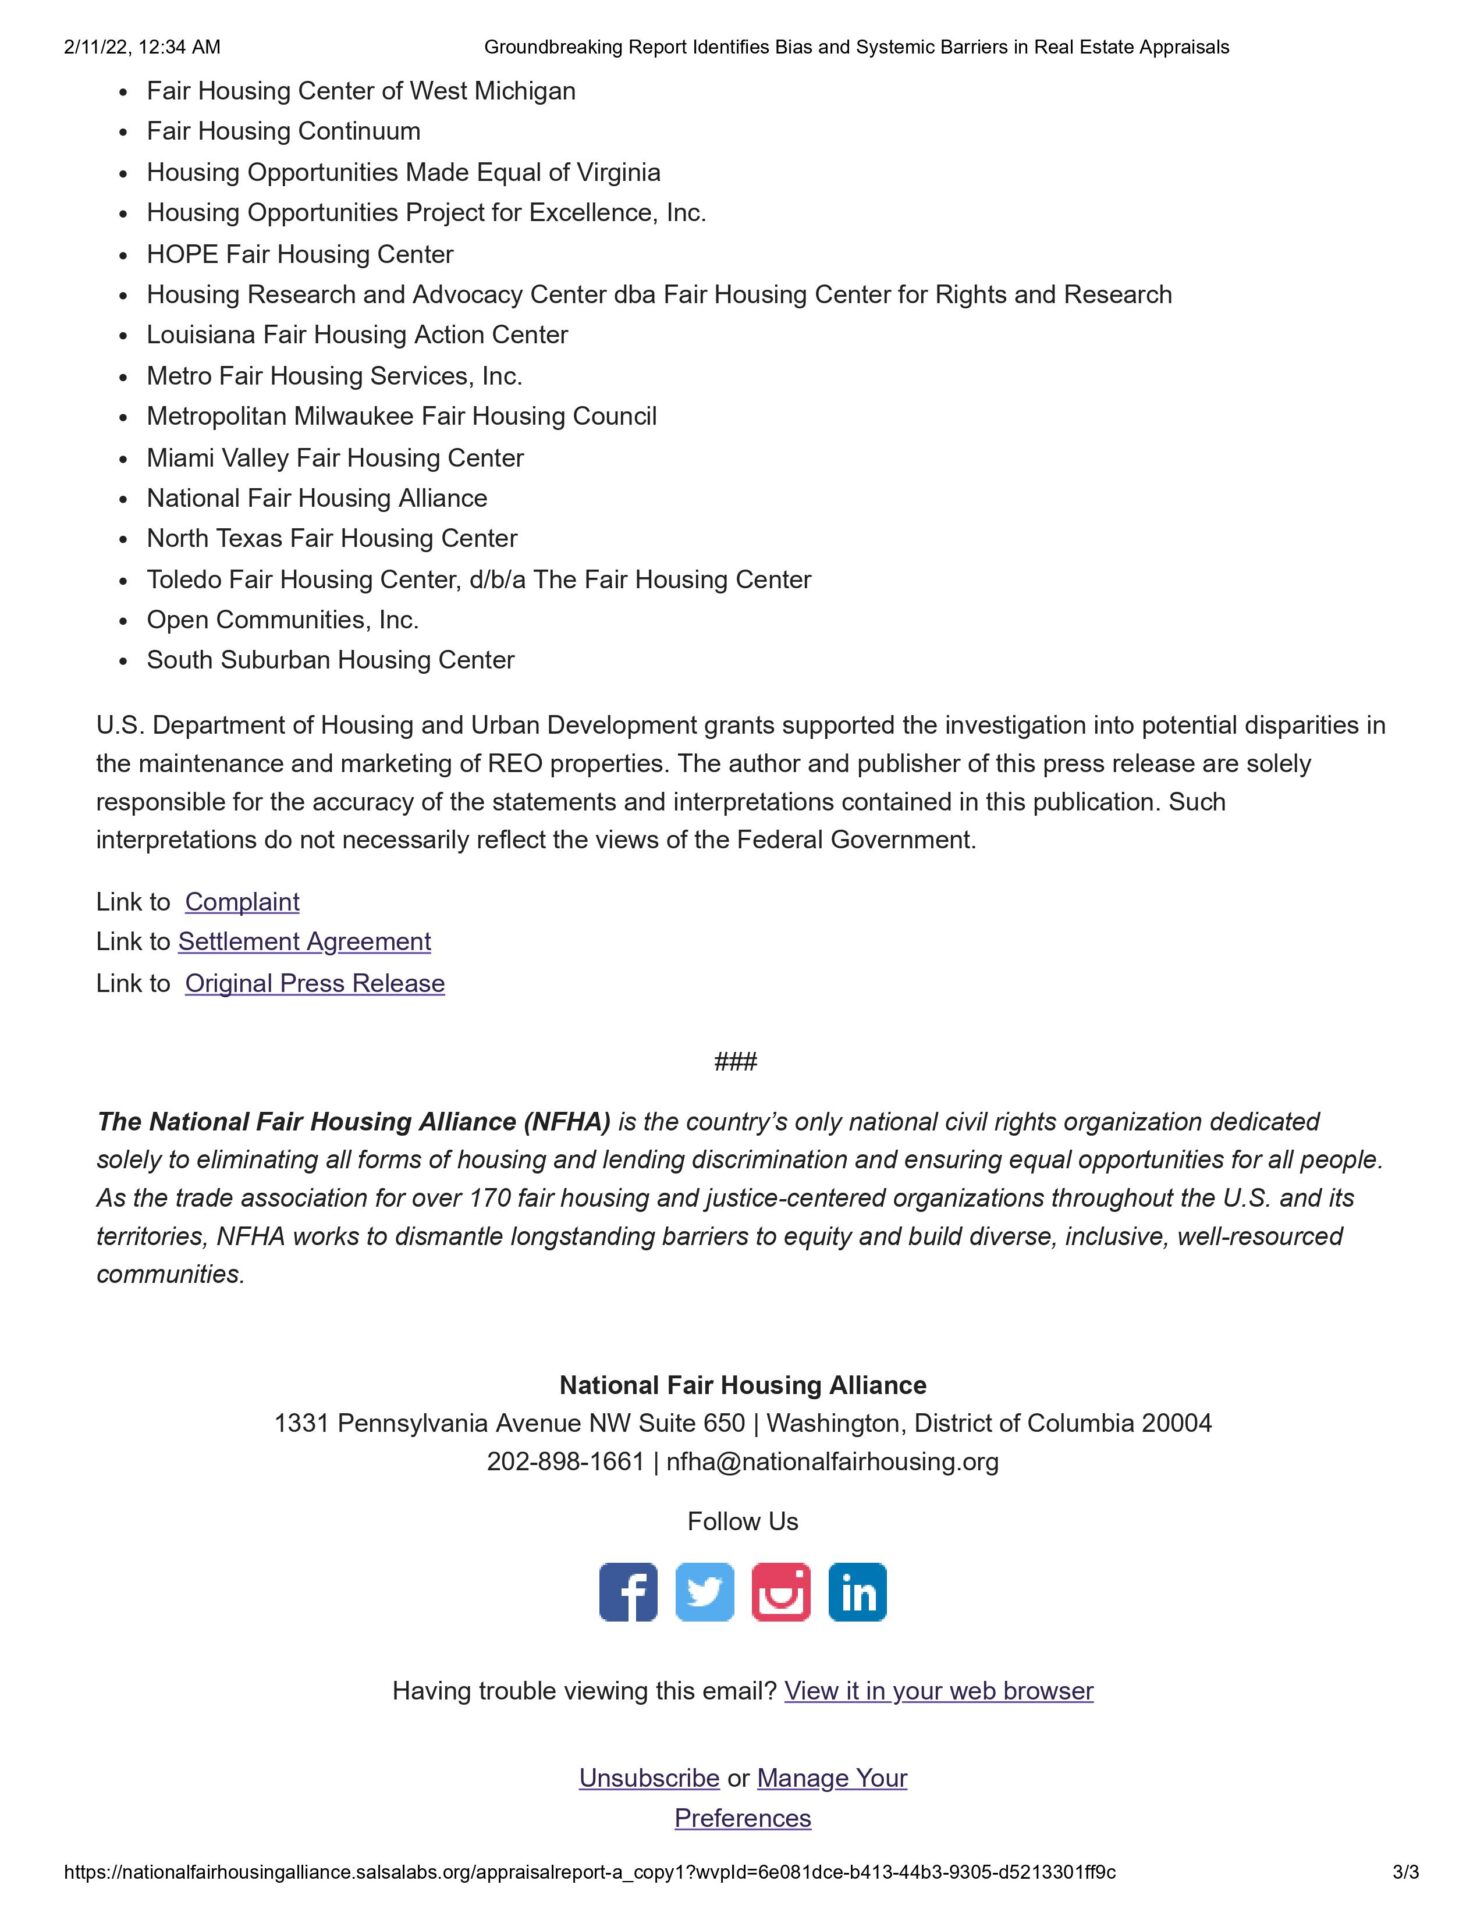 A page of the national fair housing alliance 's statement.